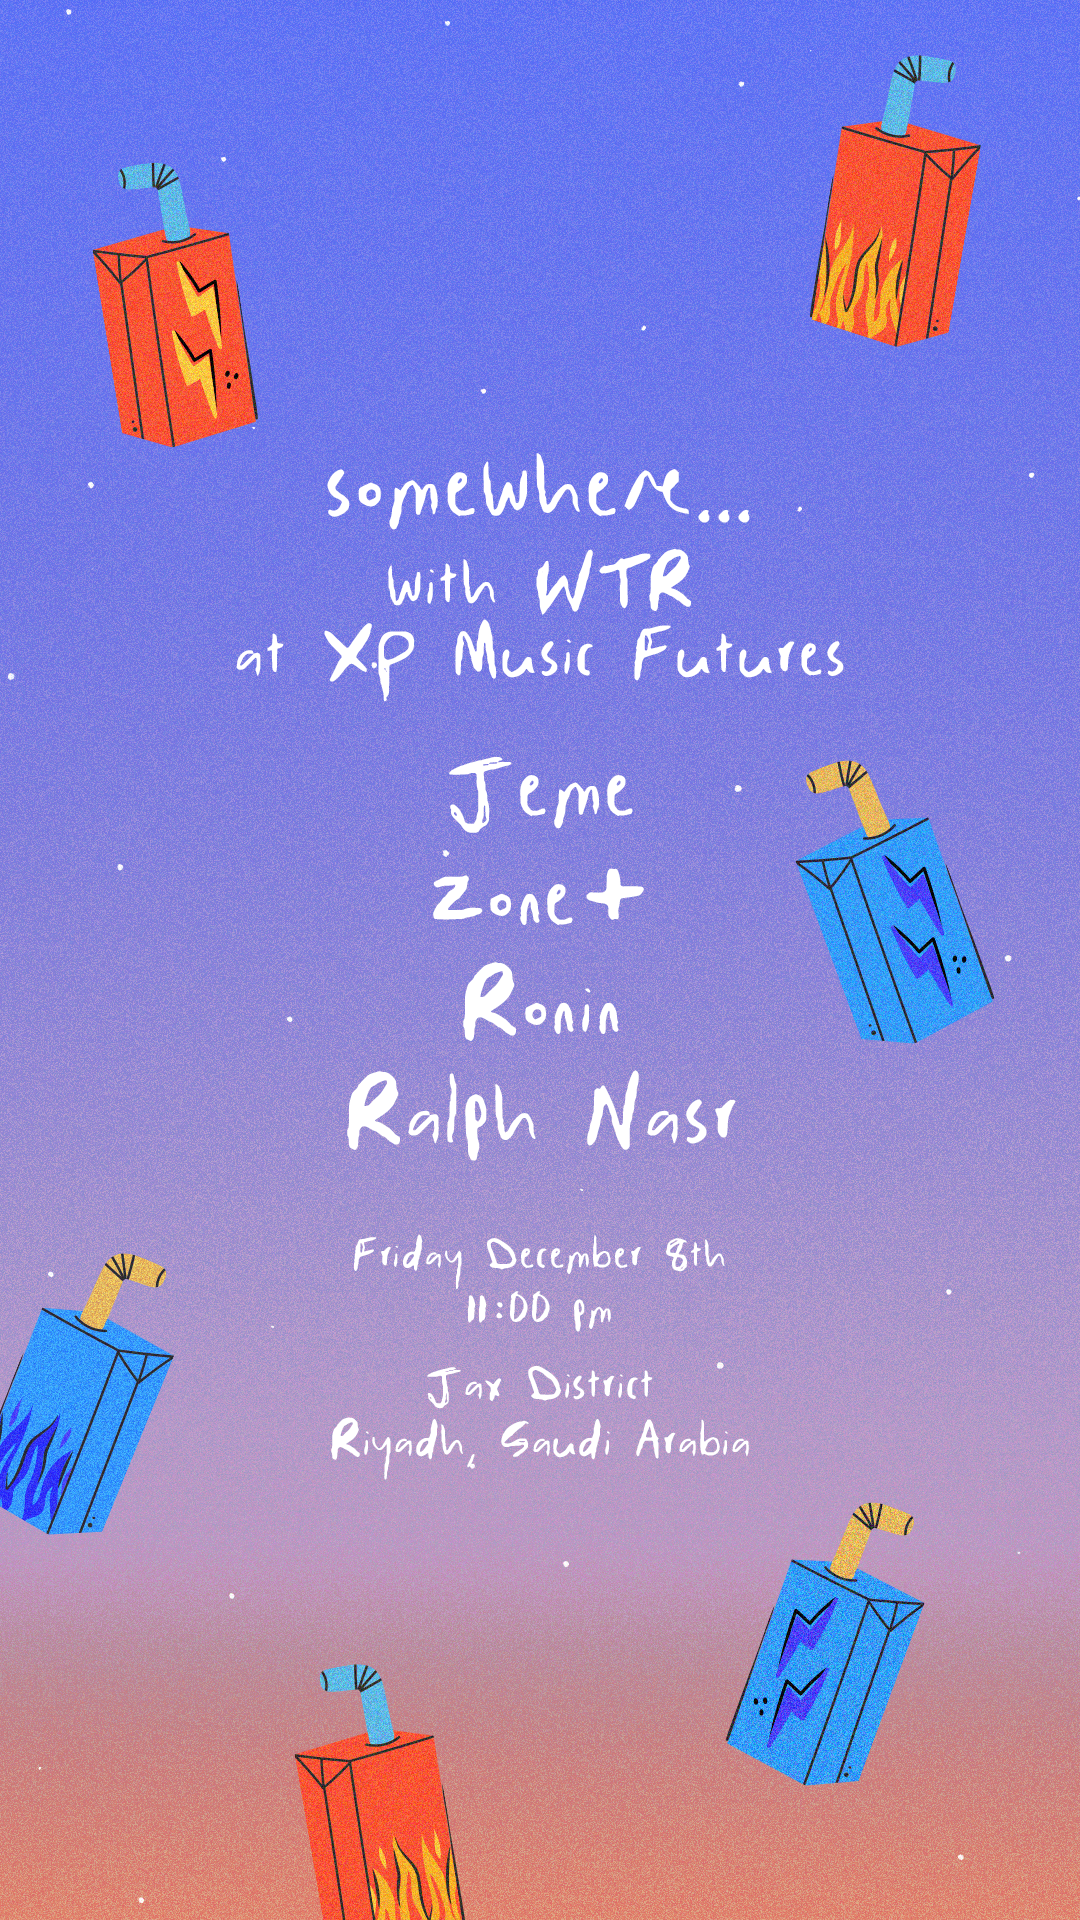 somewhere... with WTR at XP Music Futures - フライヤー表